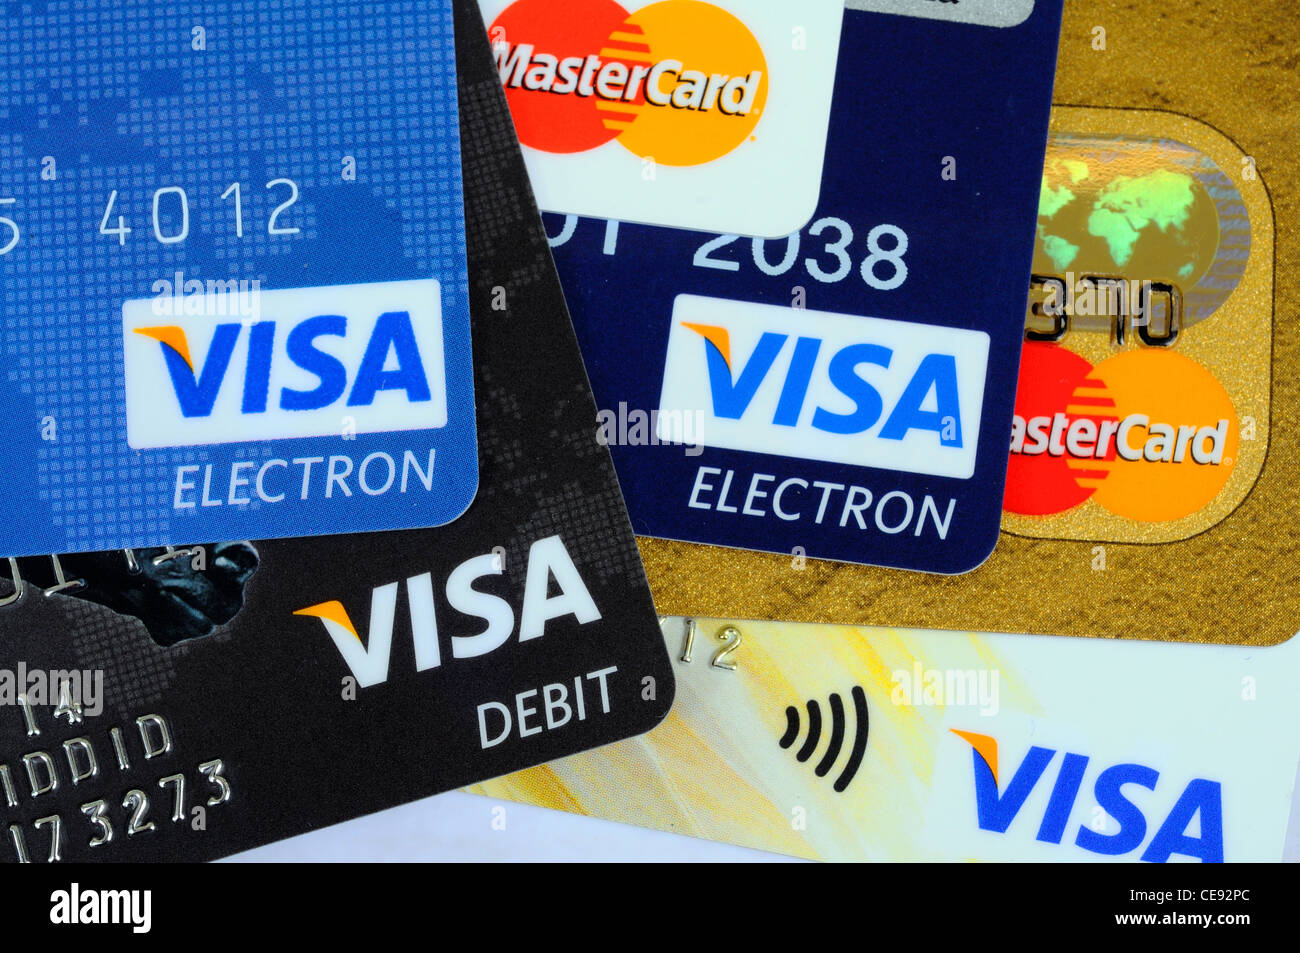 VISA and Mastercard credit and debit cards, England, UK, Western Europe  Stock Photo - Alamy